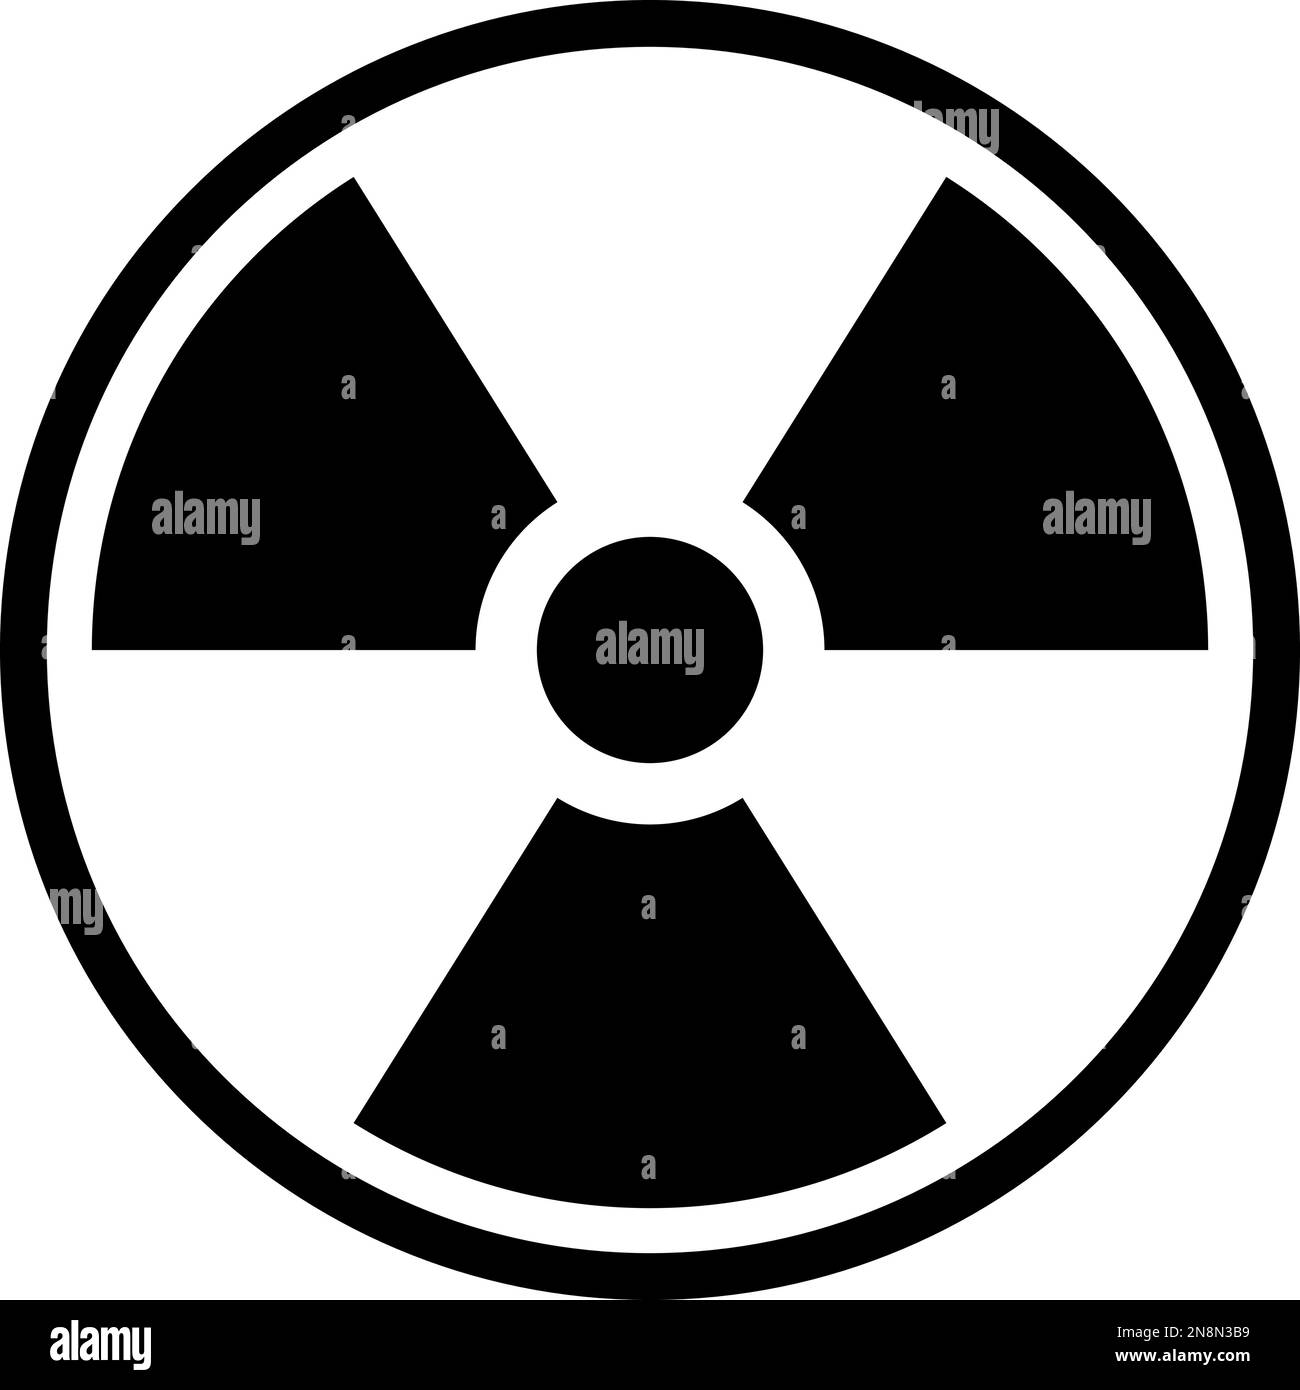 Radioactive material sign. Symbol of radiation alert, hazard or risk. Simple flat vector illustration in black and white. Stock Vector